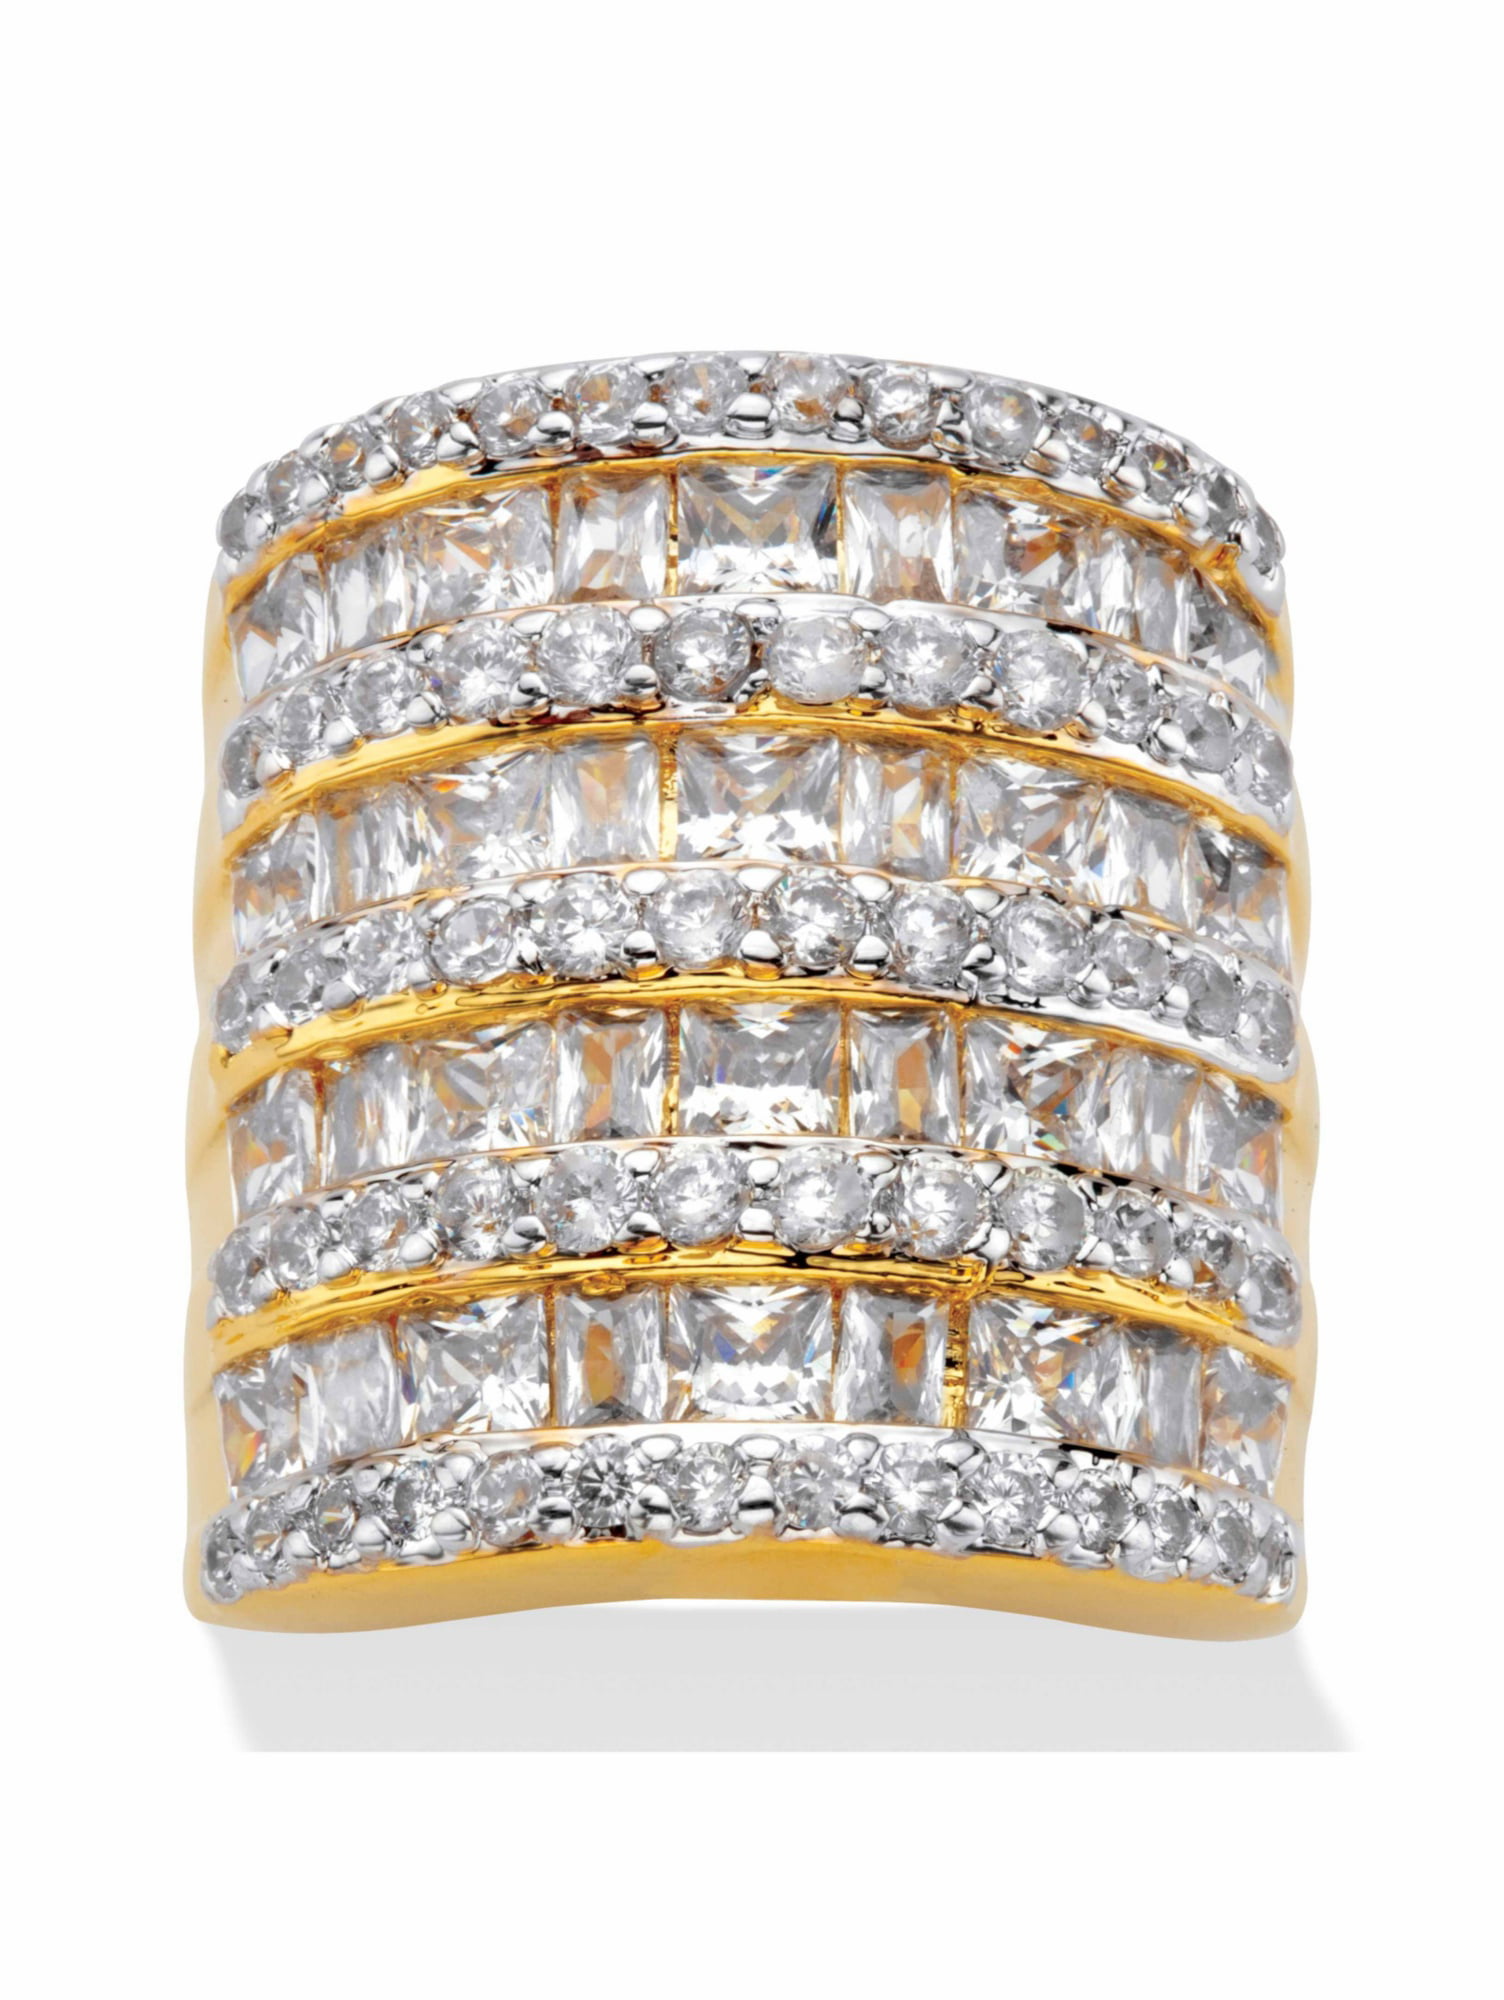 Ladies gold ring cz dome 18kt all sizes studded pave comfort cocktail size L 6 